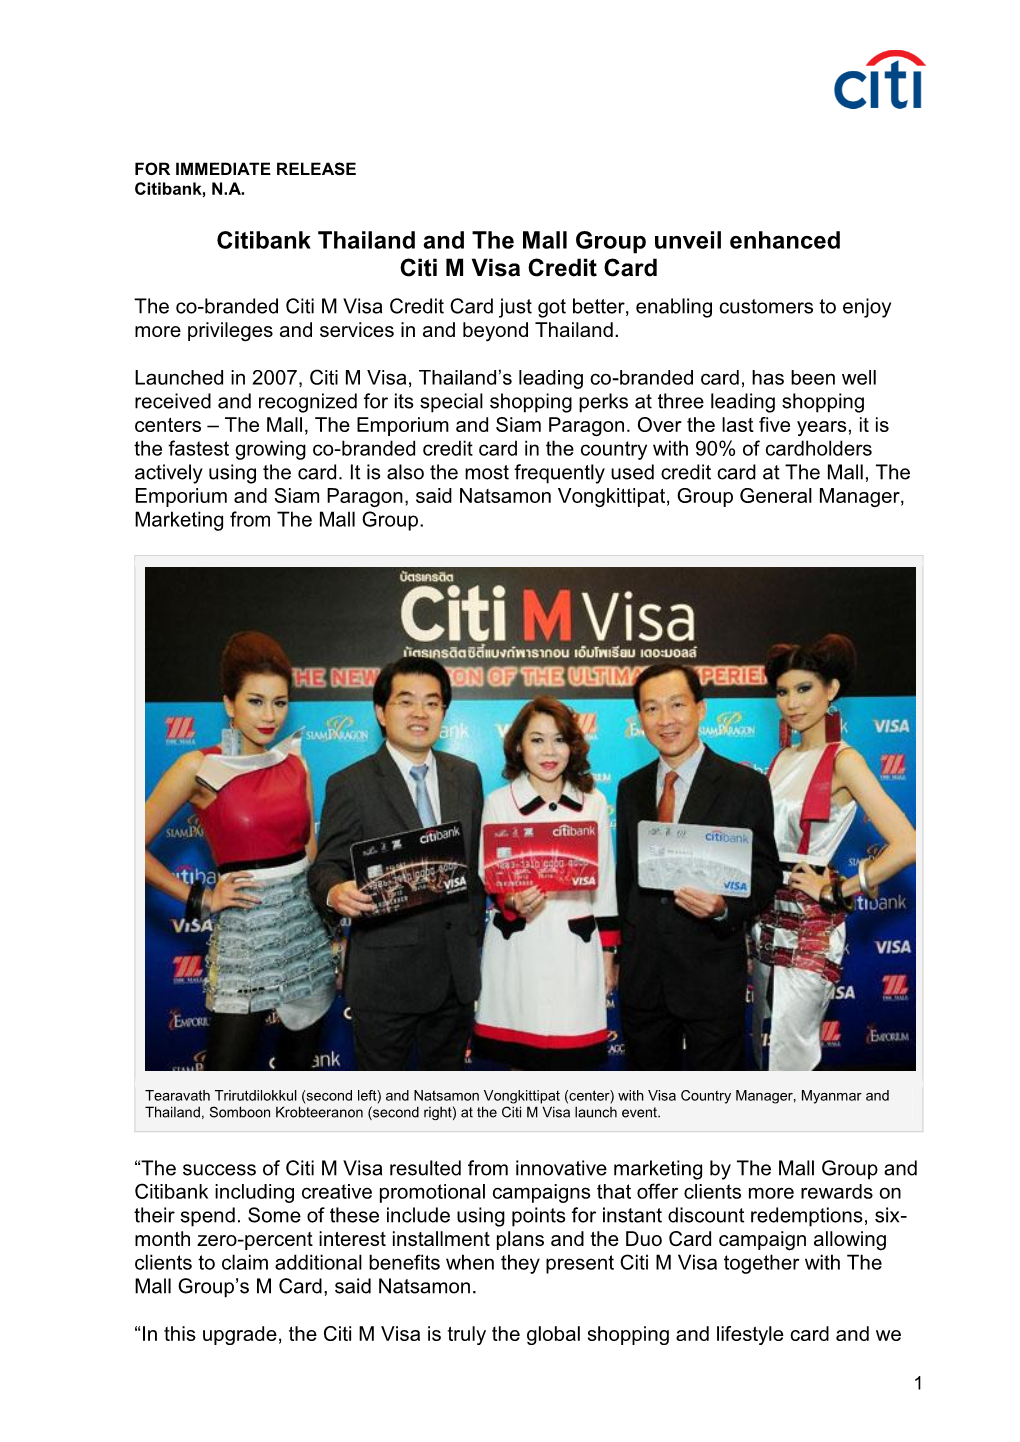 Citibank Thailand and the Mall Group Unveil Enhanced Citi M Visa Credit Card